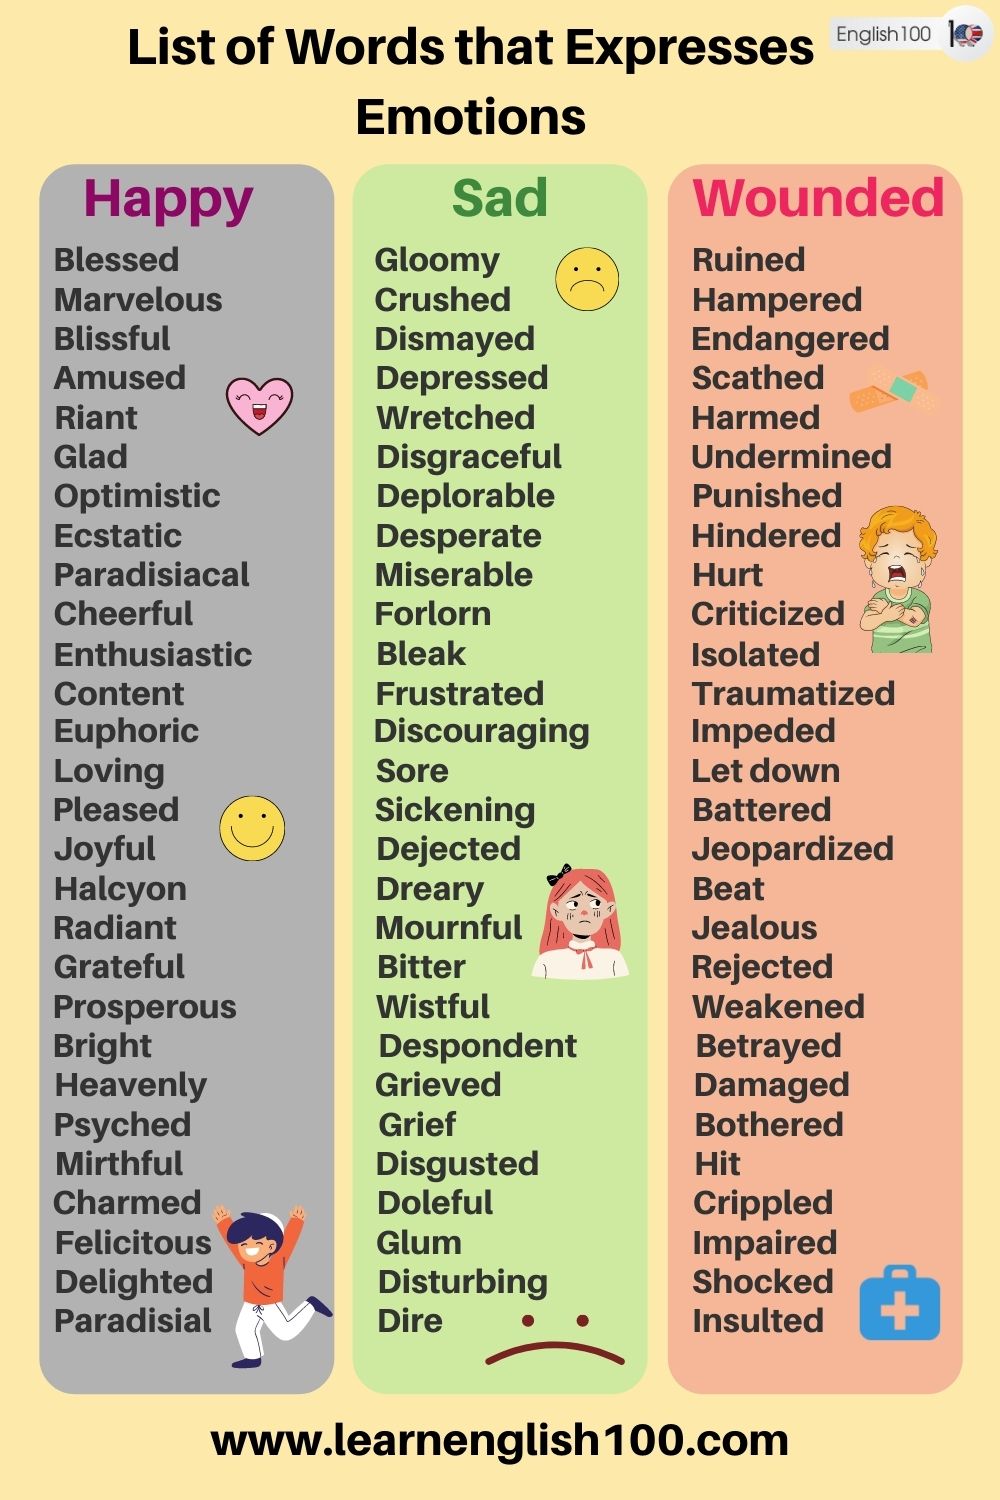 List of Words that Expresses Emotions